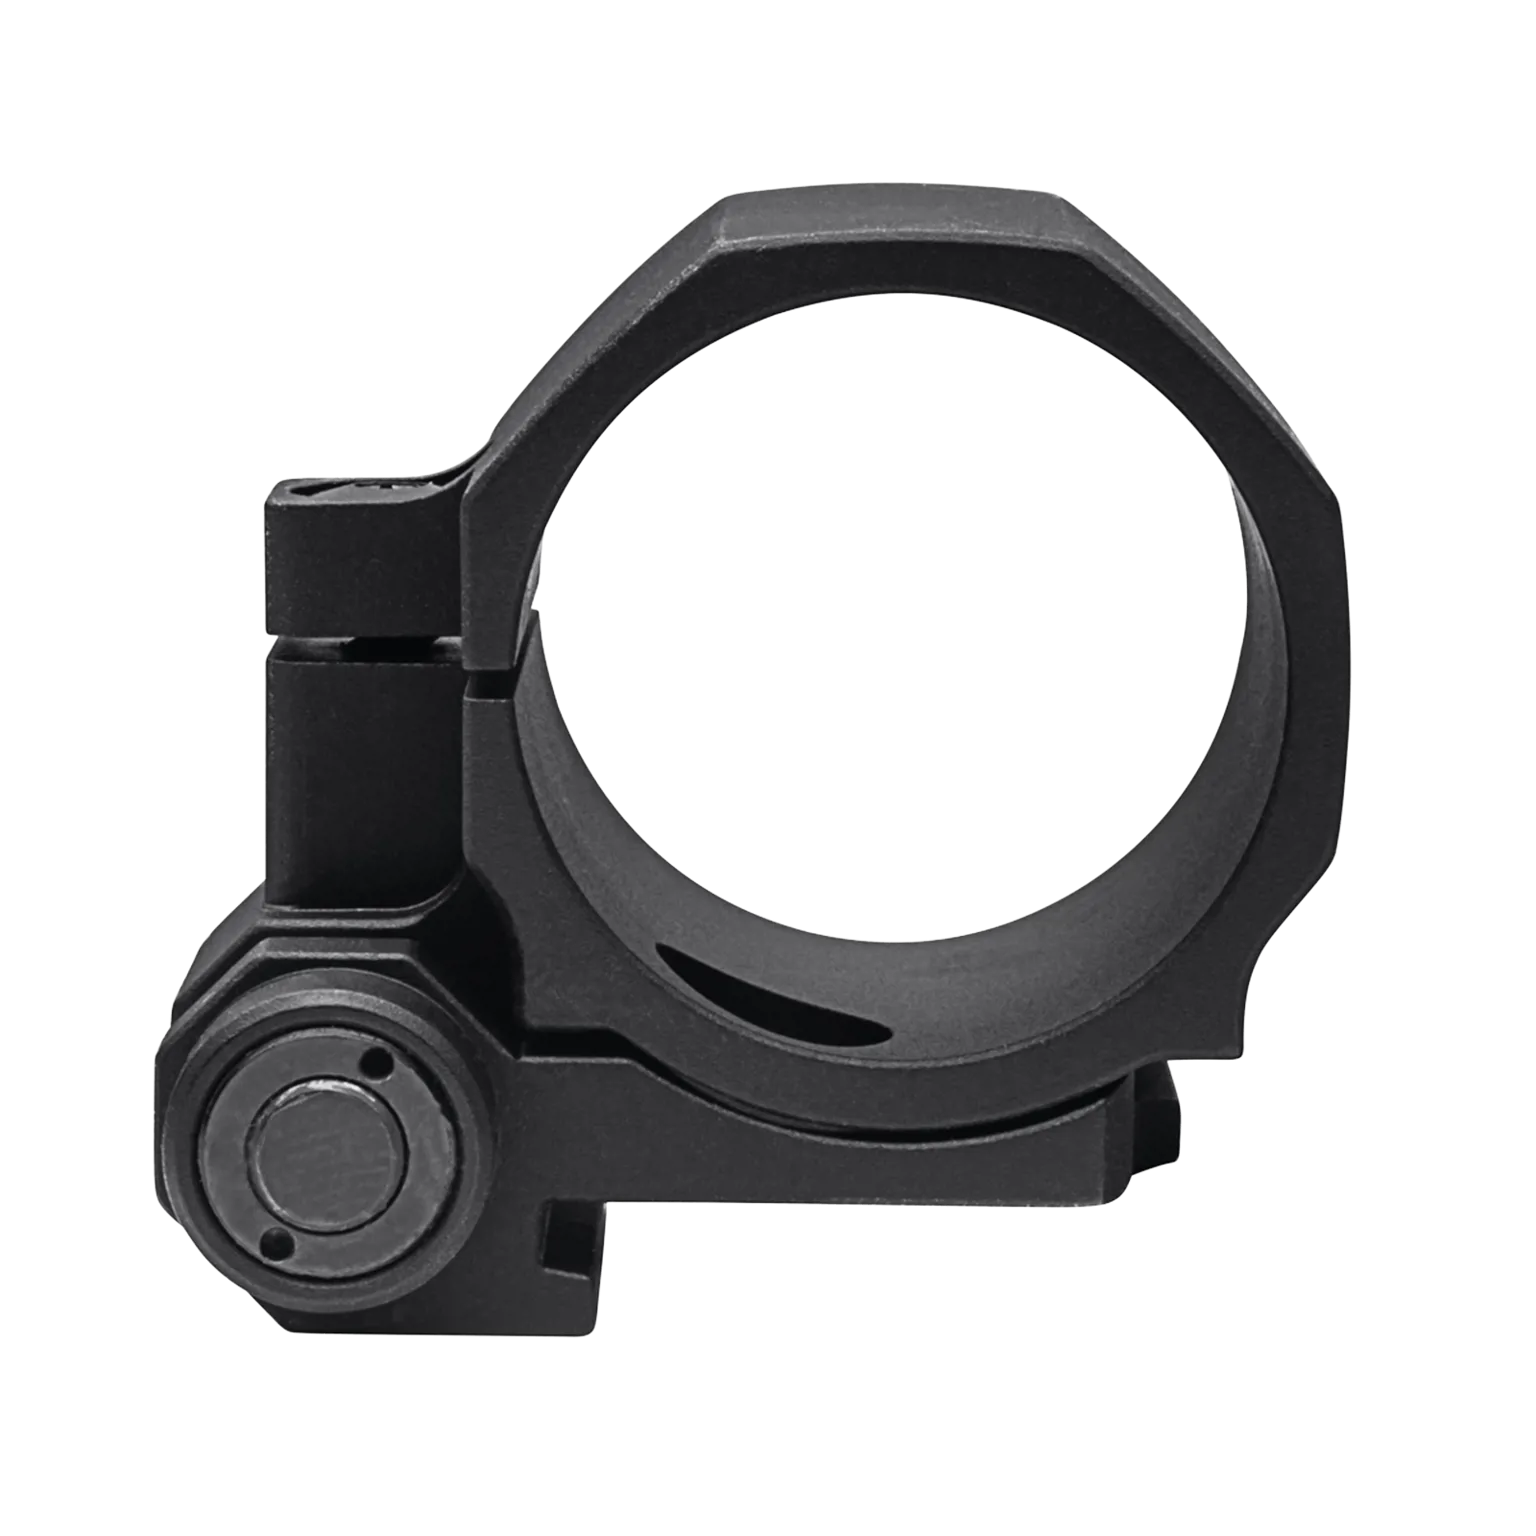 FlipMount™ 30 mm - Top Ring Ring only - requires TwistMount™ base  - 3